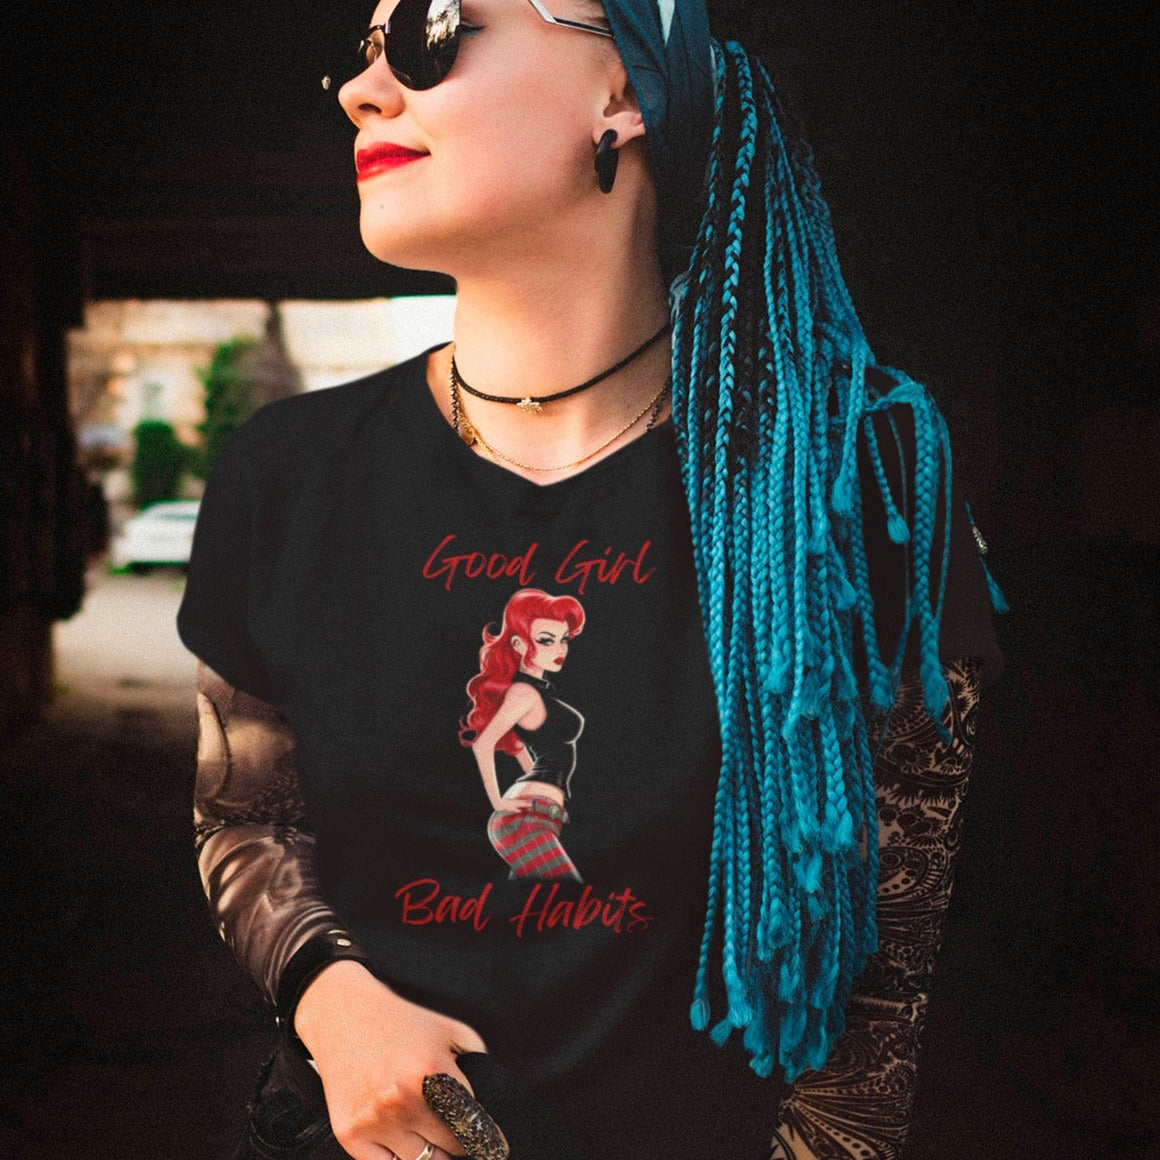 good-girl-bad-habits-bella-canvas-black-t-shirt-mockup-featuring-an-edgy-woman-with-blue-braids